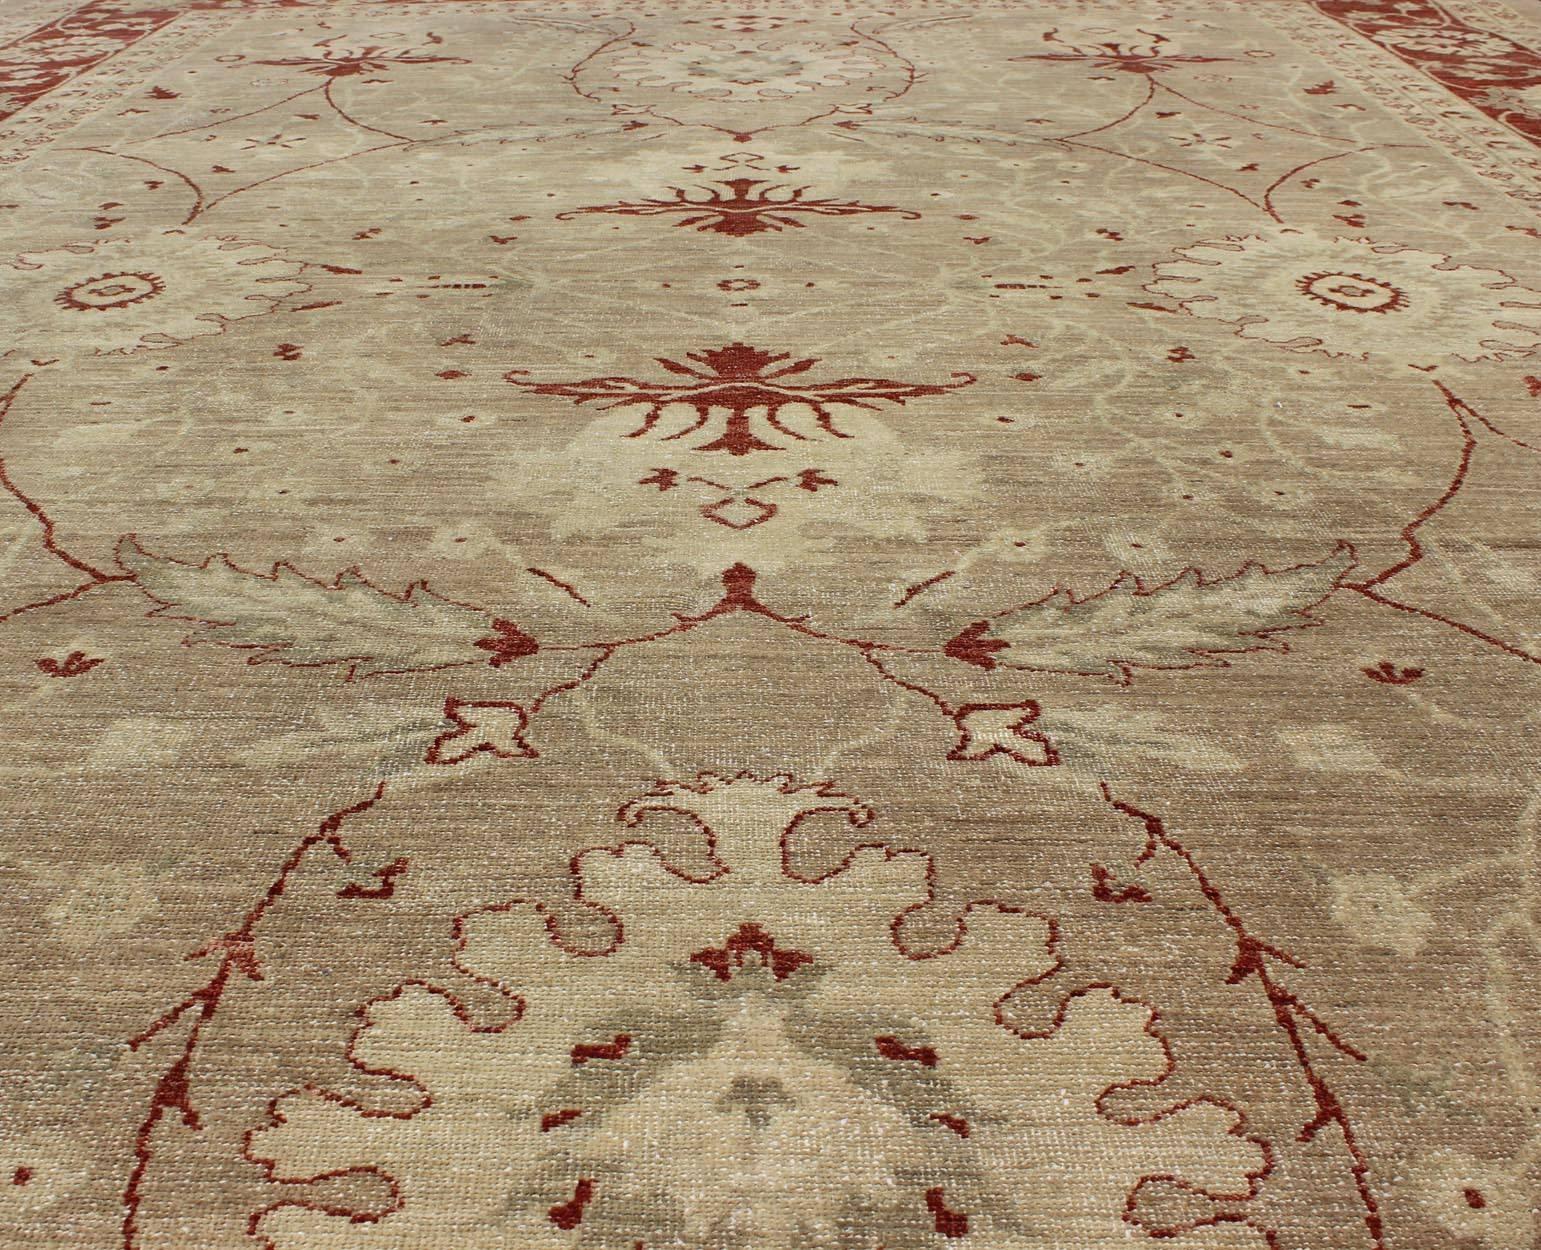 Sultanabad Design Rug with Stylized Design in Light Camel, Cream & Garnet Red For Sale 3